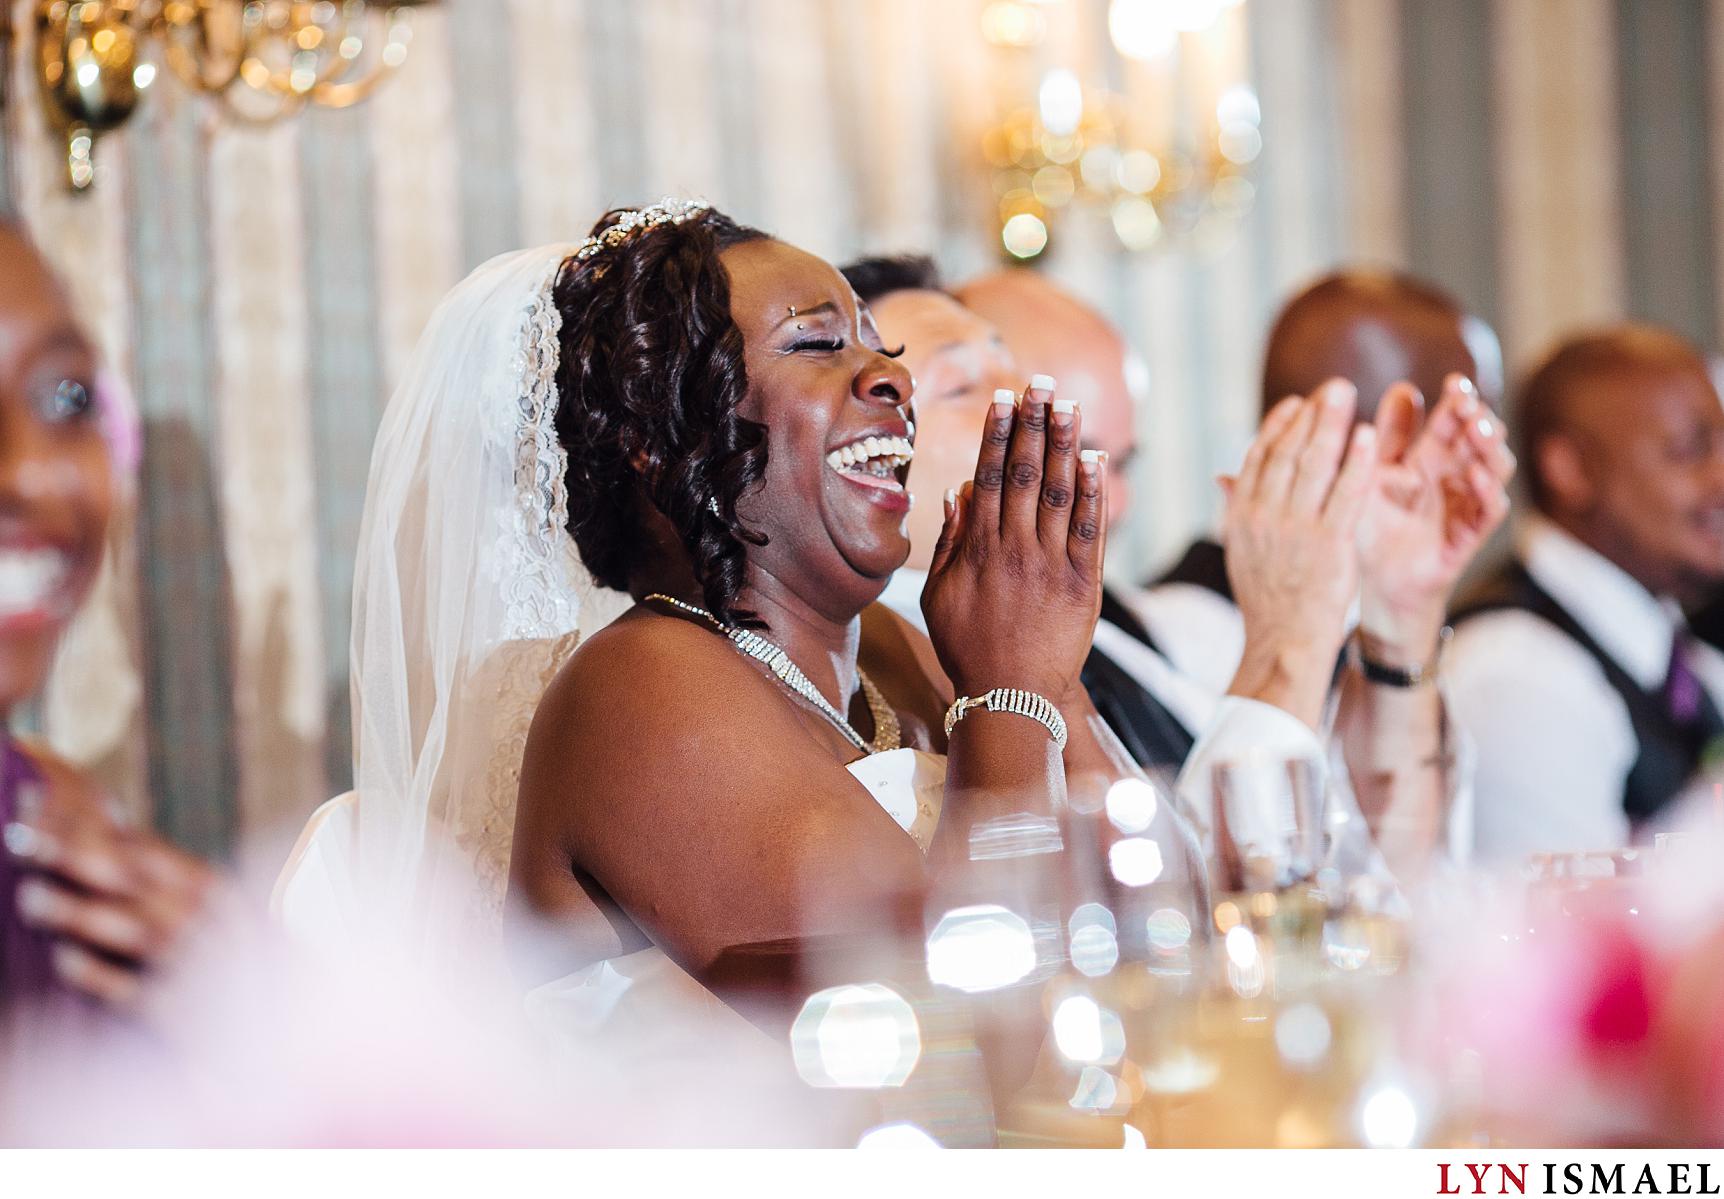 Bride's reaction to the maid of honour's funny anecdote.